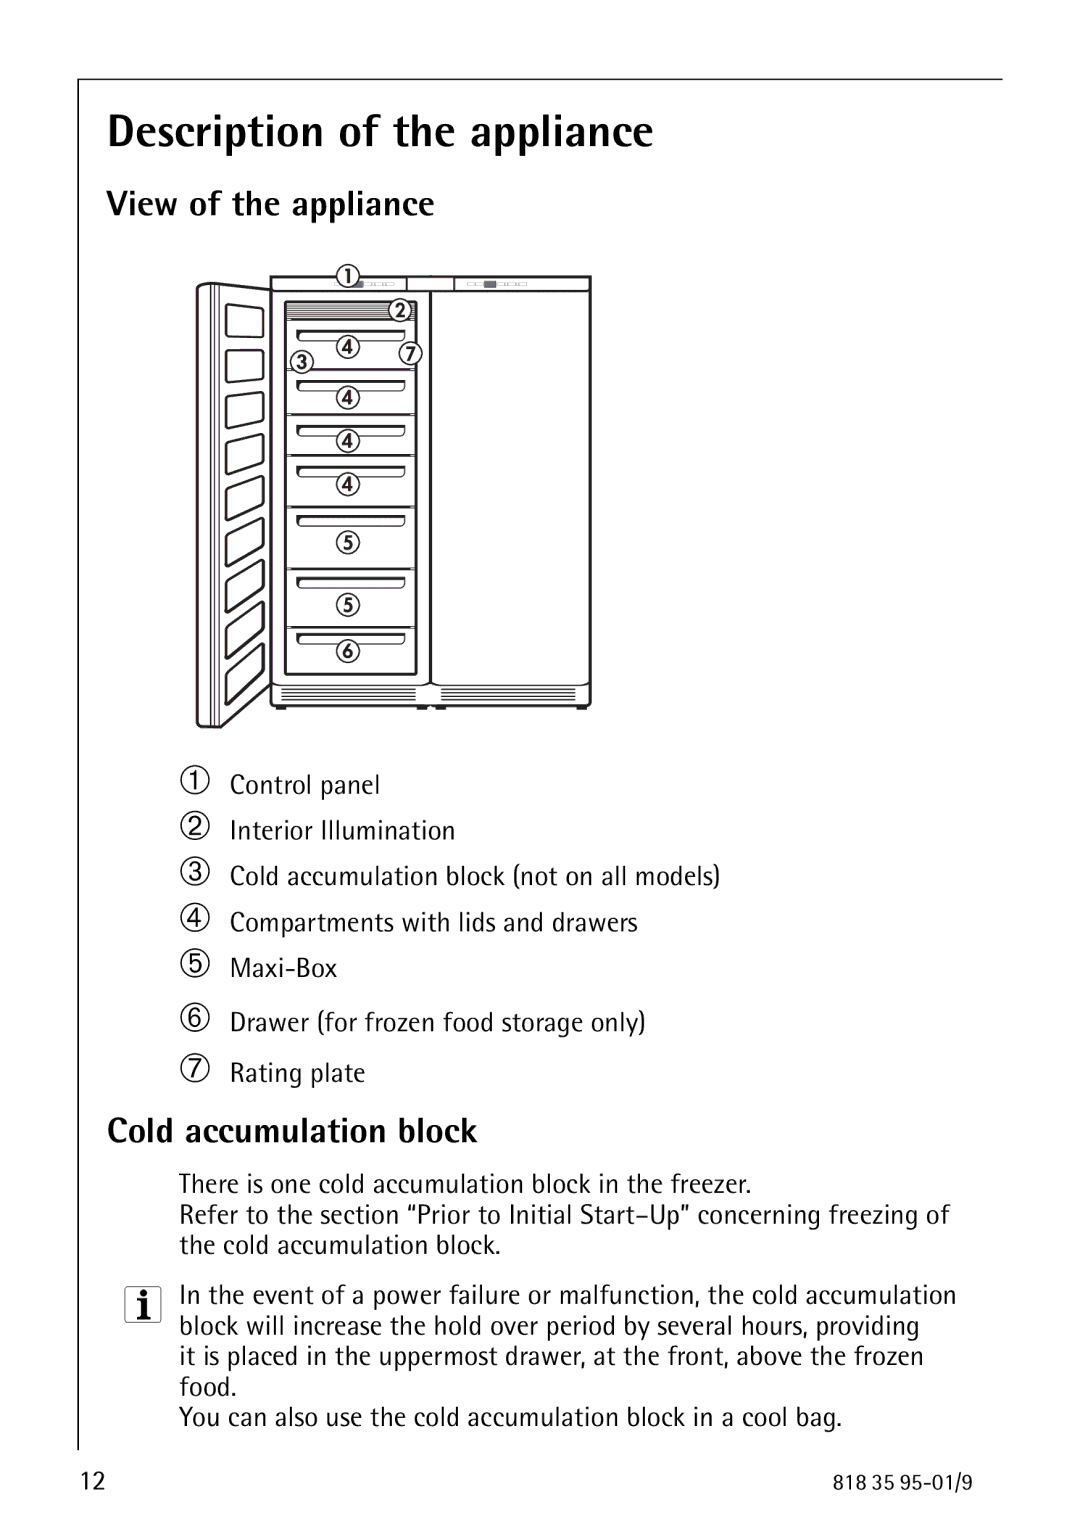 AEG 75248 GA1 manual Description of the appliance, View of the appliance, Cold accumulation block 